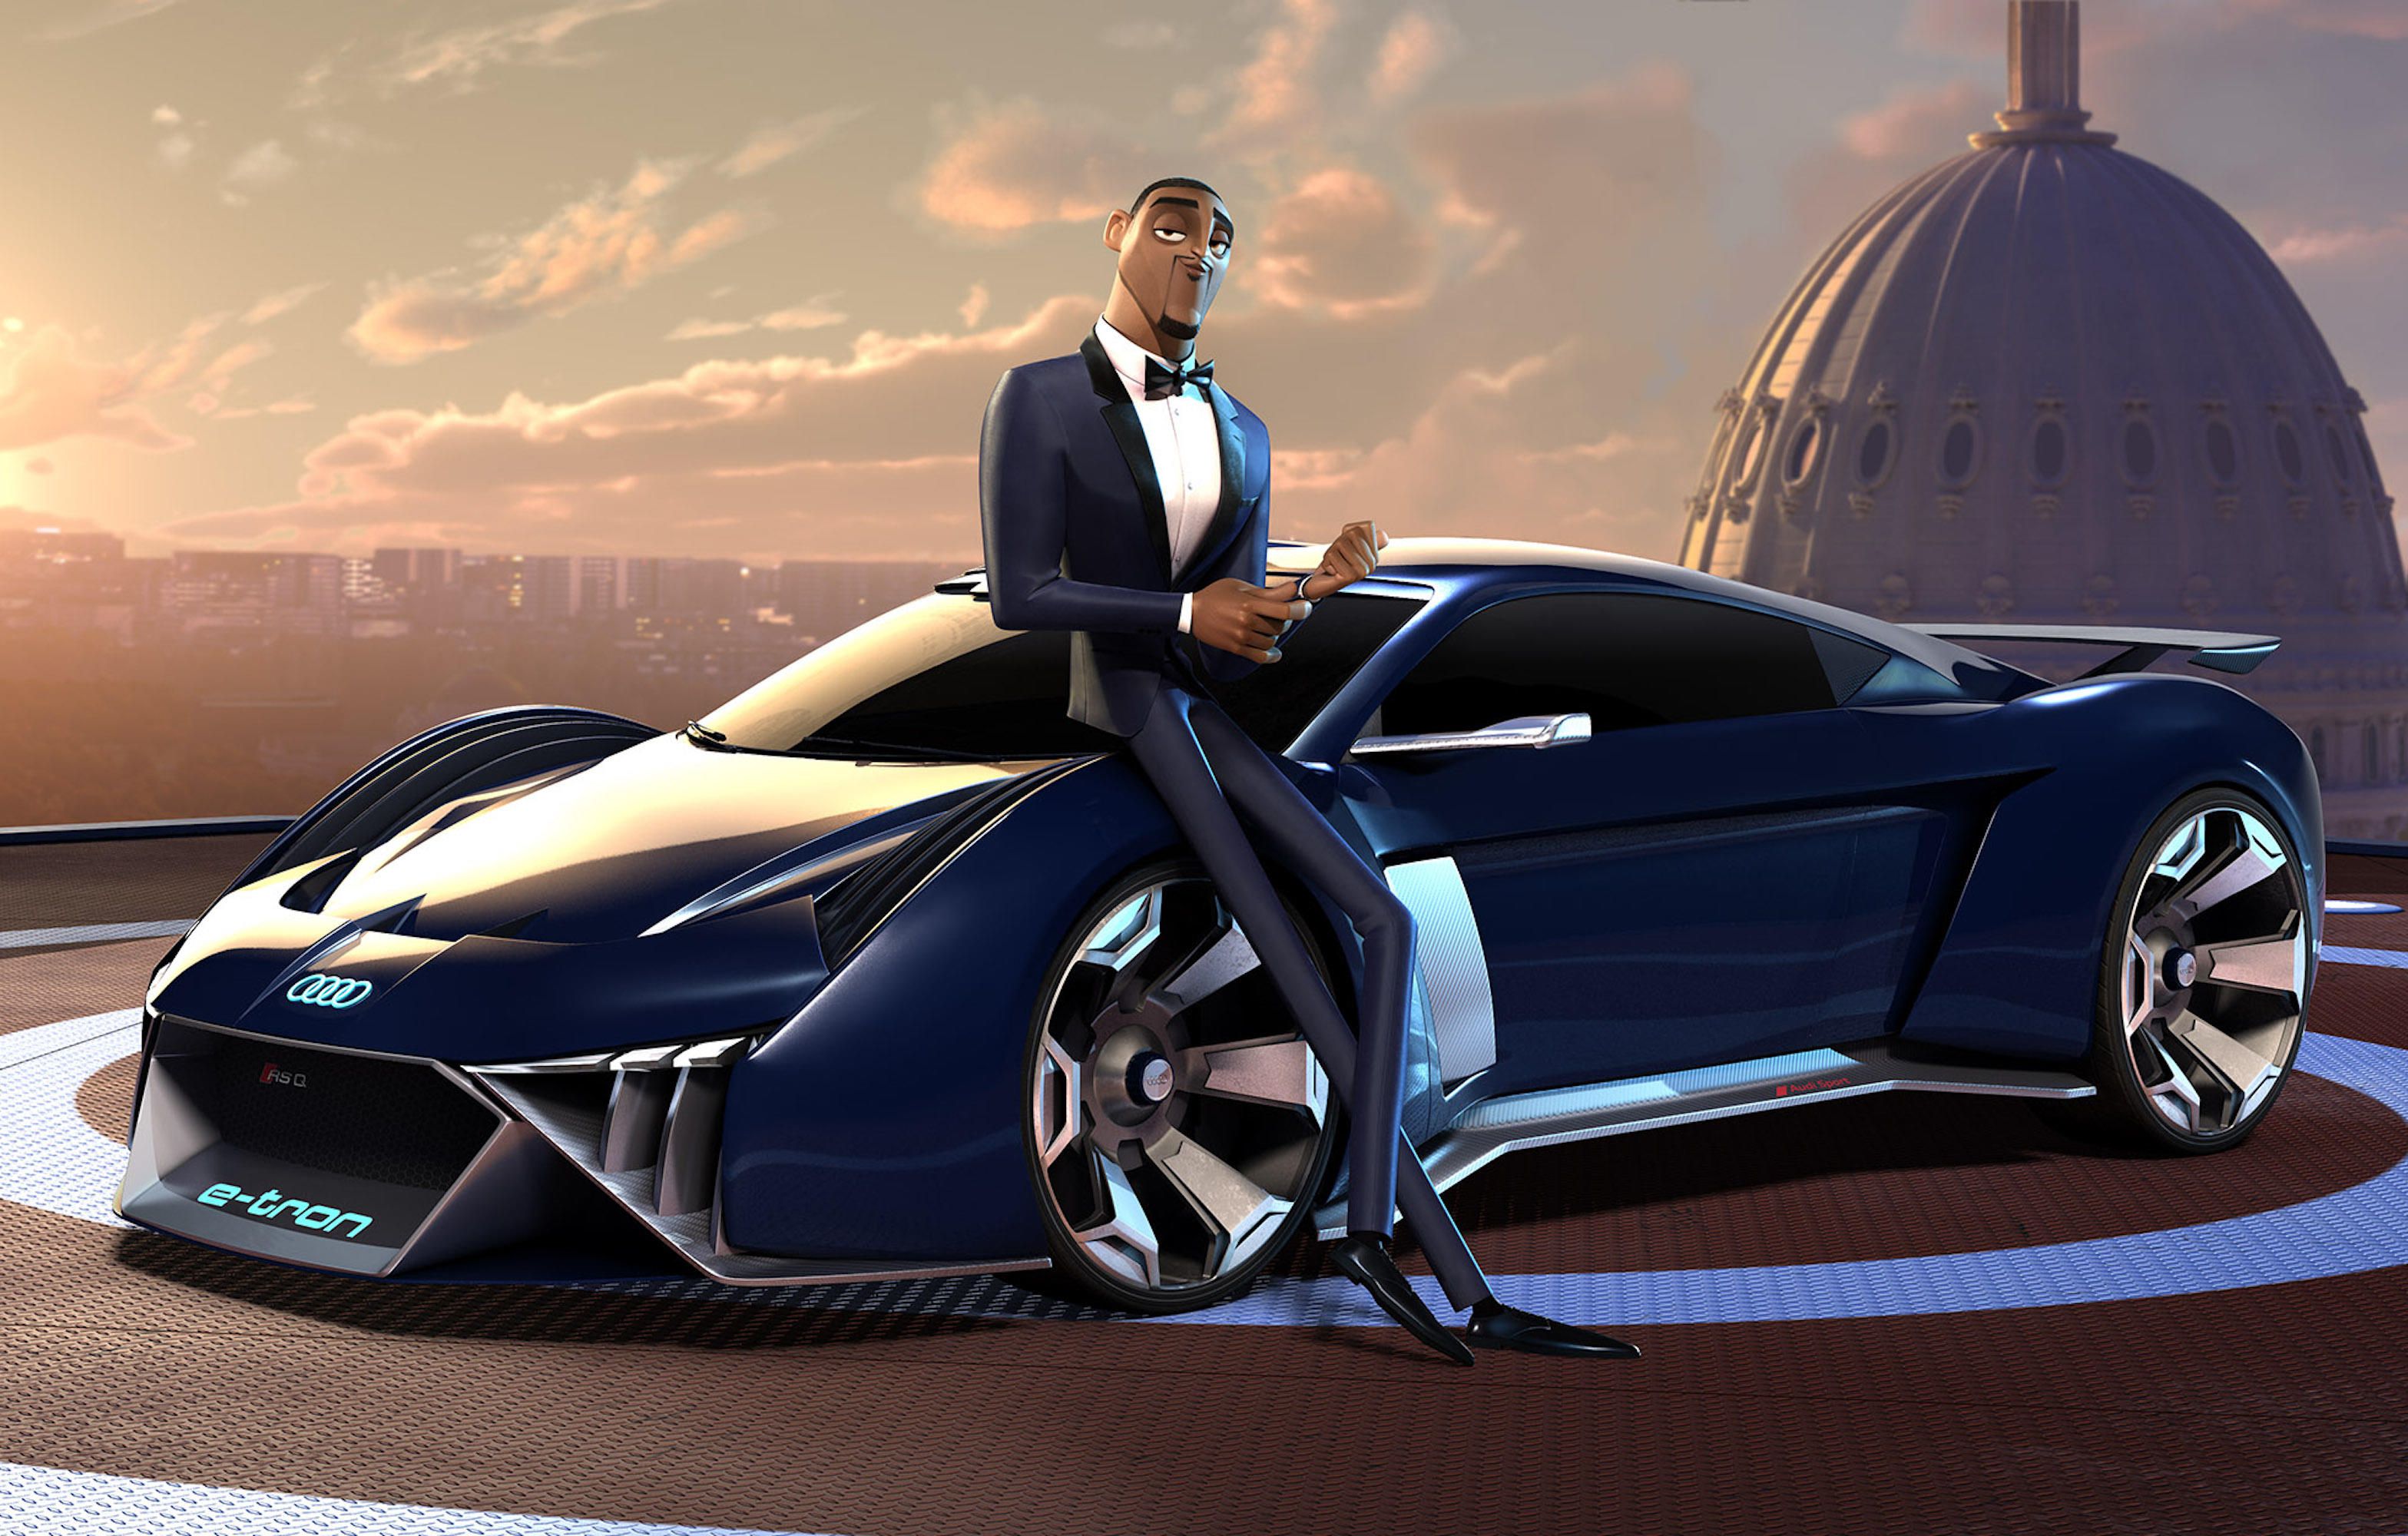 Wallpapers Audi movies spies in disguise on the desktop